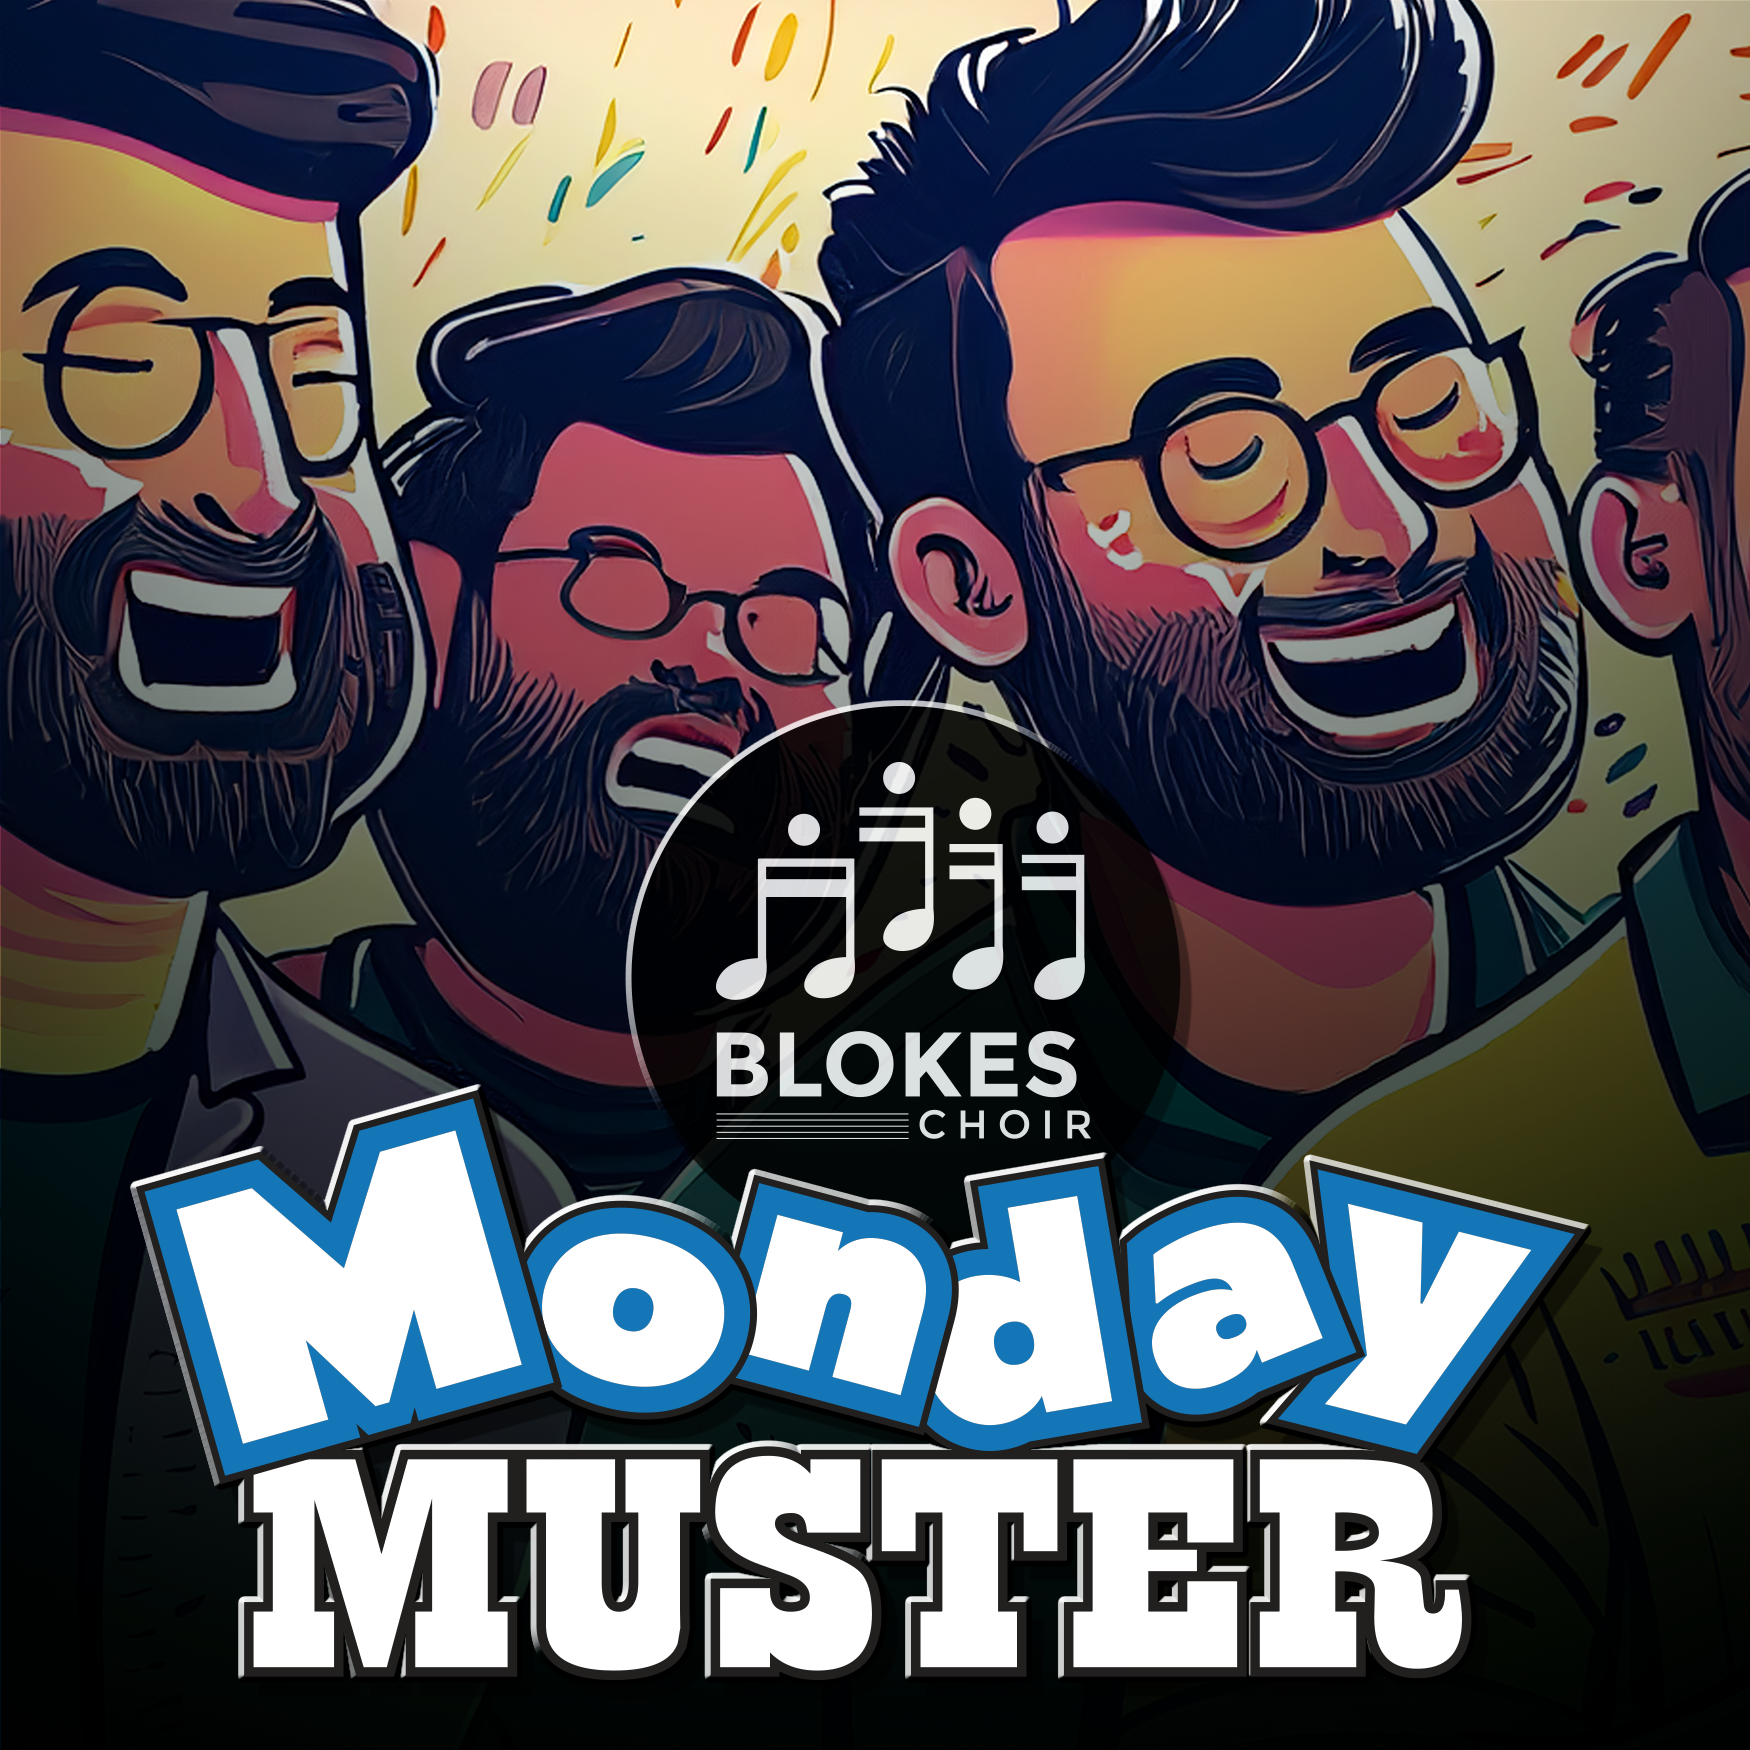 Monday Muster - Initial Meet and Greet for Interested Blokes